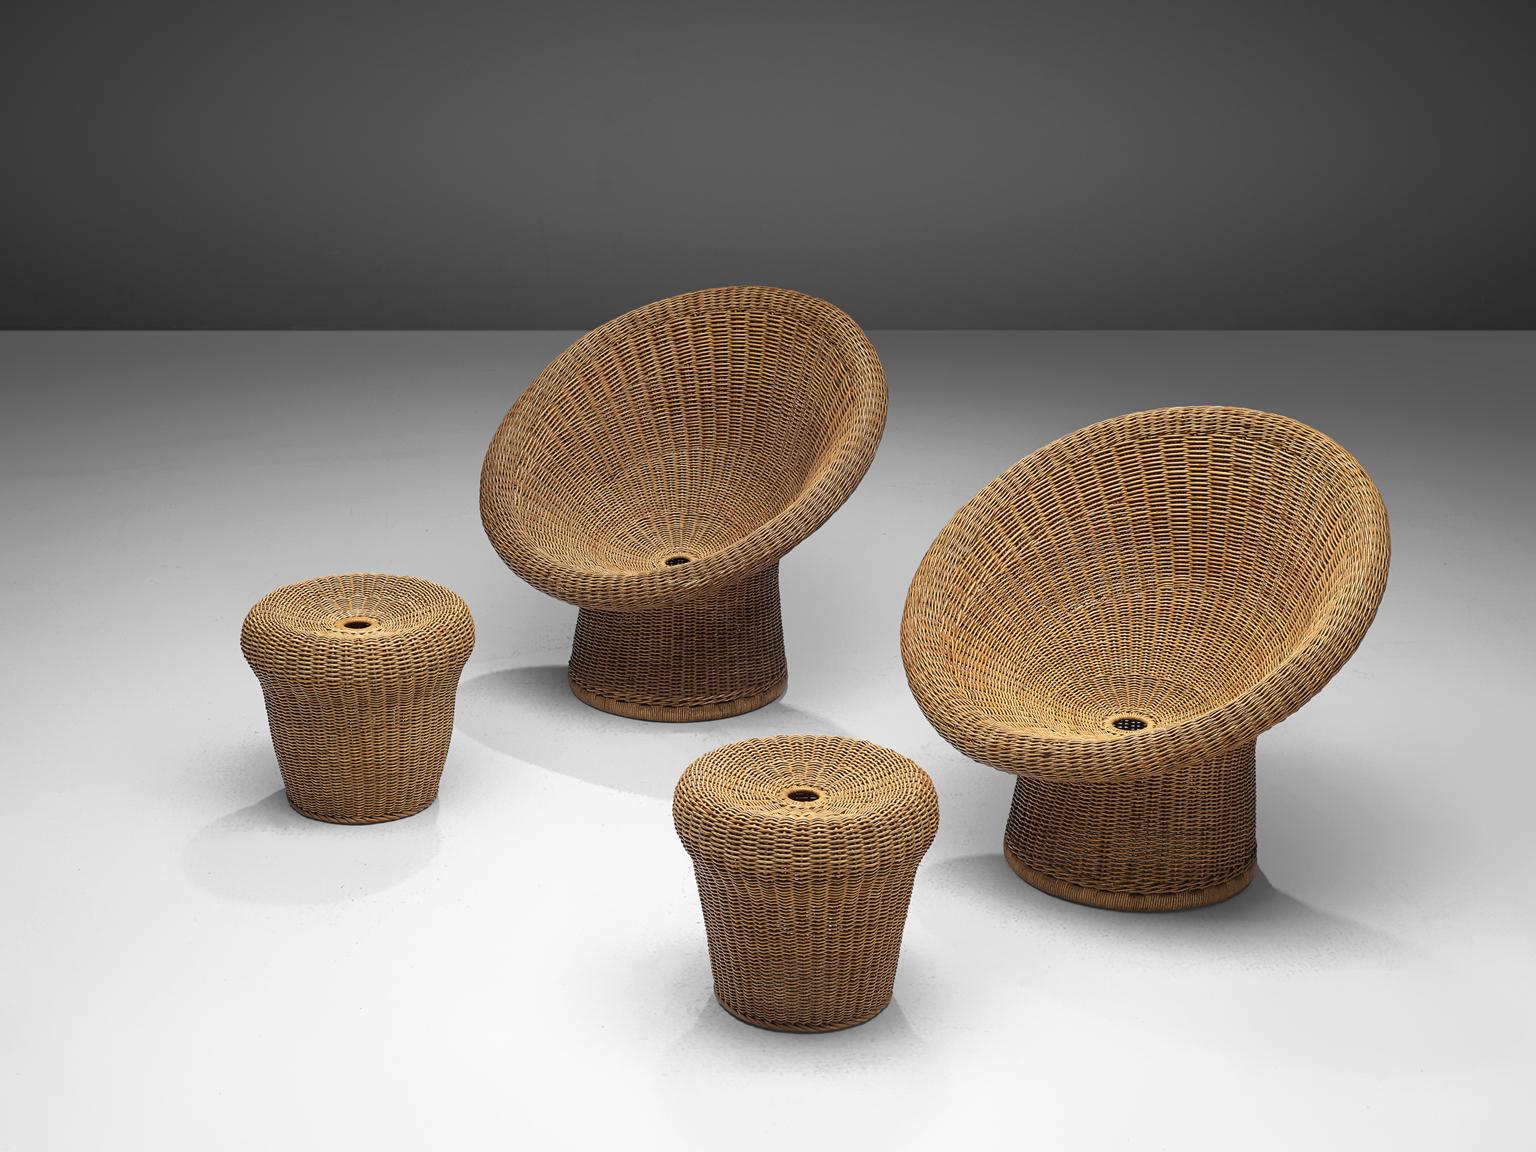 Egon Eiermann, pair of lounge chairs with ottoman E 10, wicker, Germany, design 1952, production, 1960s

Already in the 1940s Eiermann had woven wicker for covering couches and armchairs, but also used it as an architectural element in outdoor